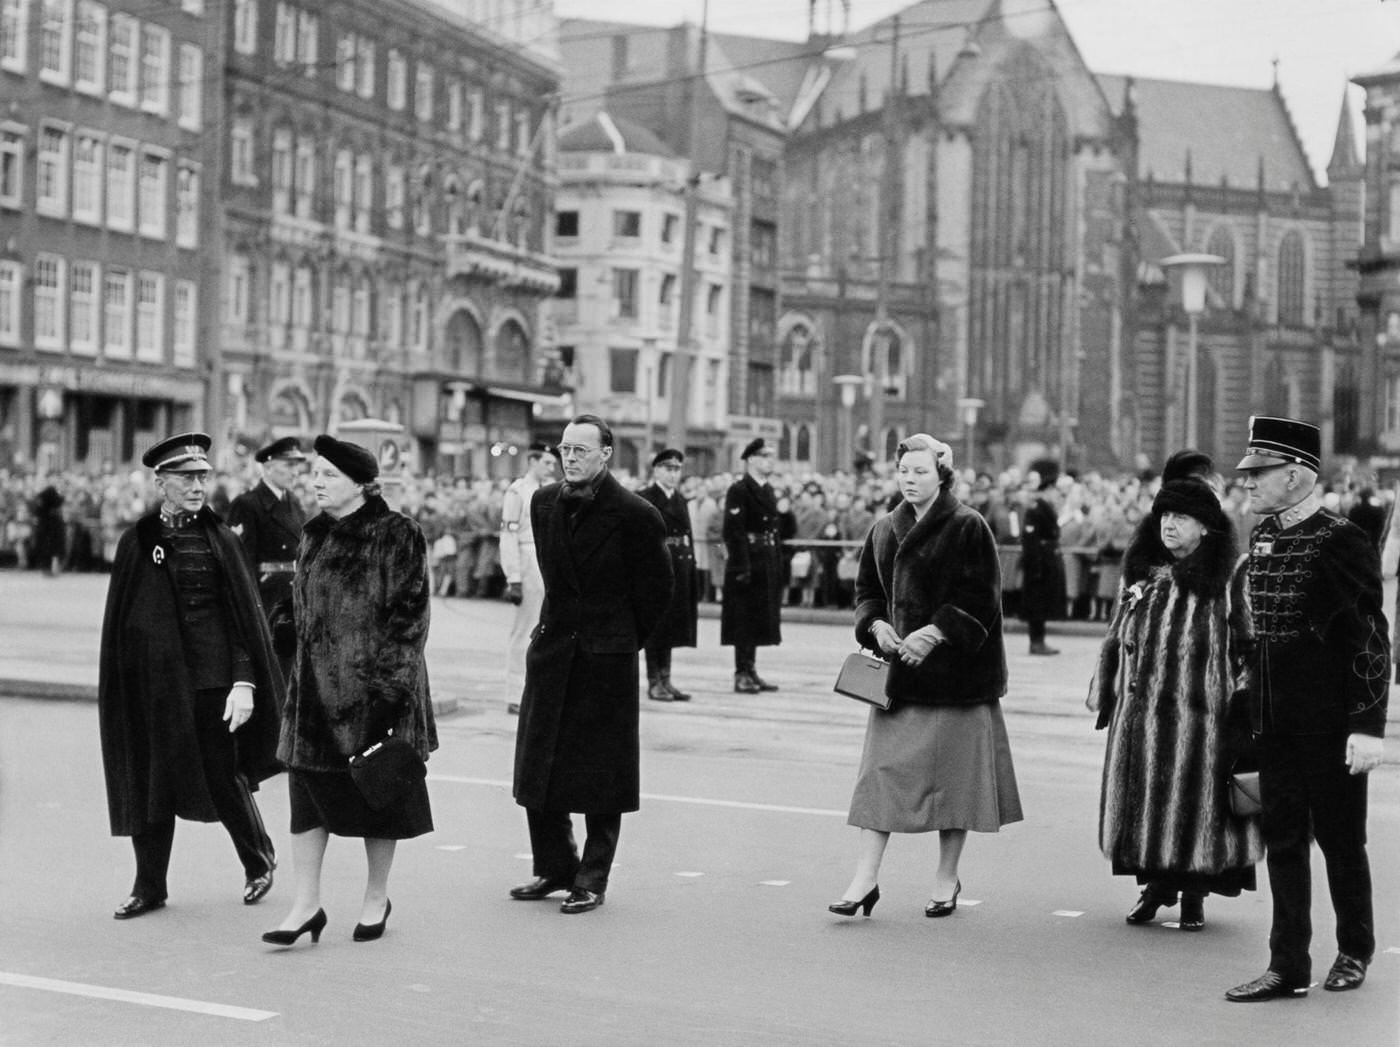 Dutch Royal Family at a ceremony in which Hungarian revolutionaries presented their flag to Queen Juliana, Amsterdam, 1956.